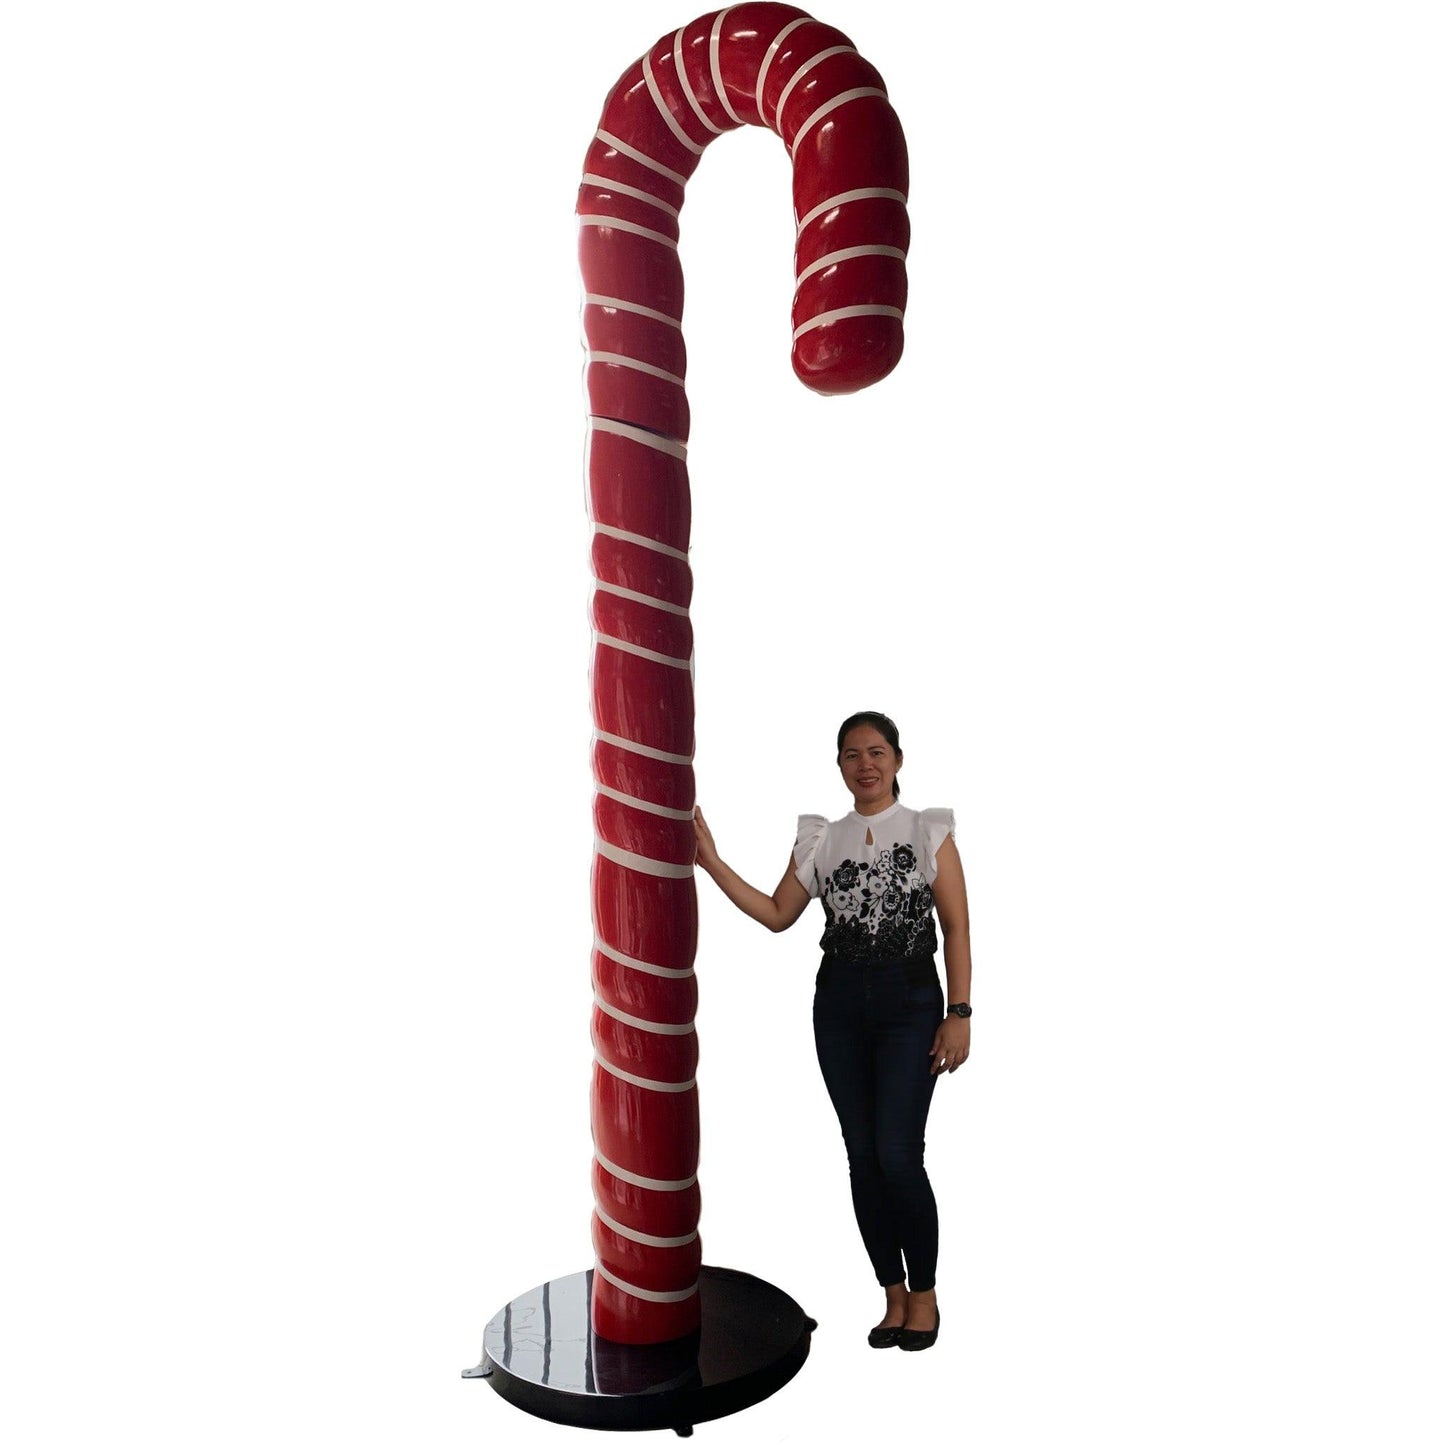 Jumbo Red Cushion Candy Cane Statue - LM Treasures Prop Rentals 